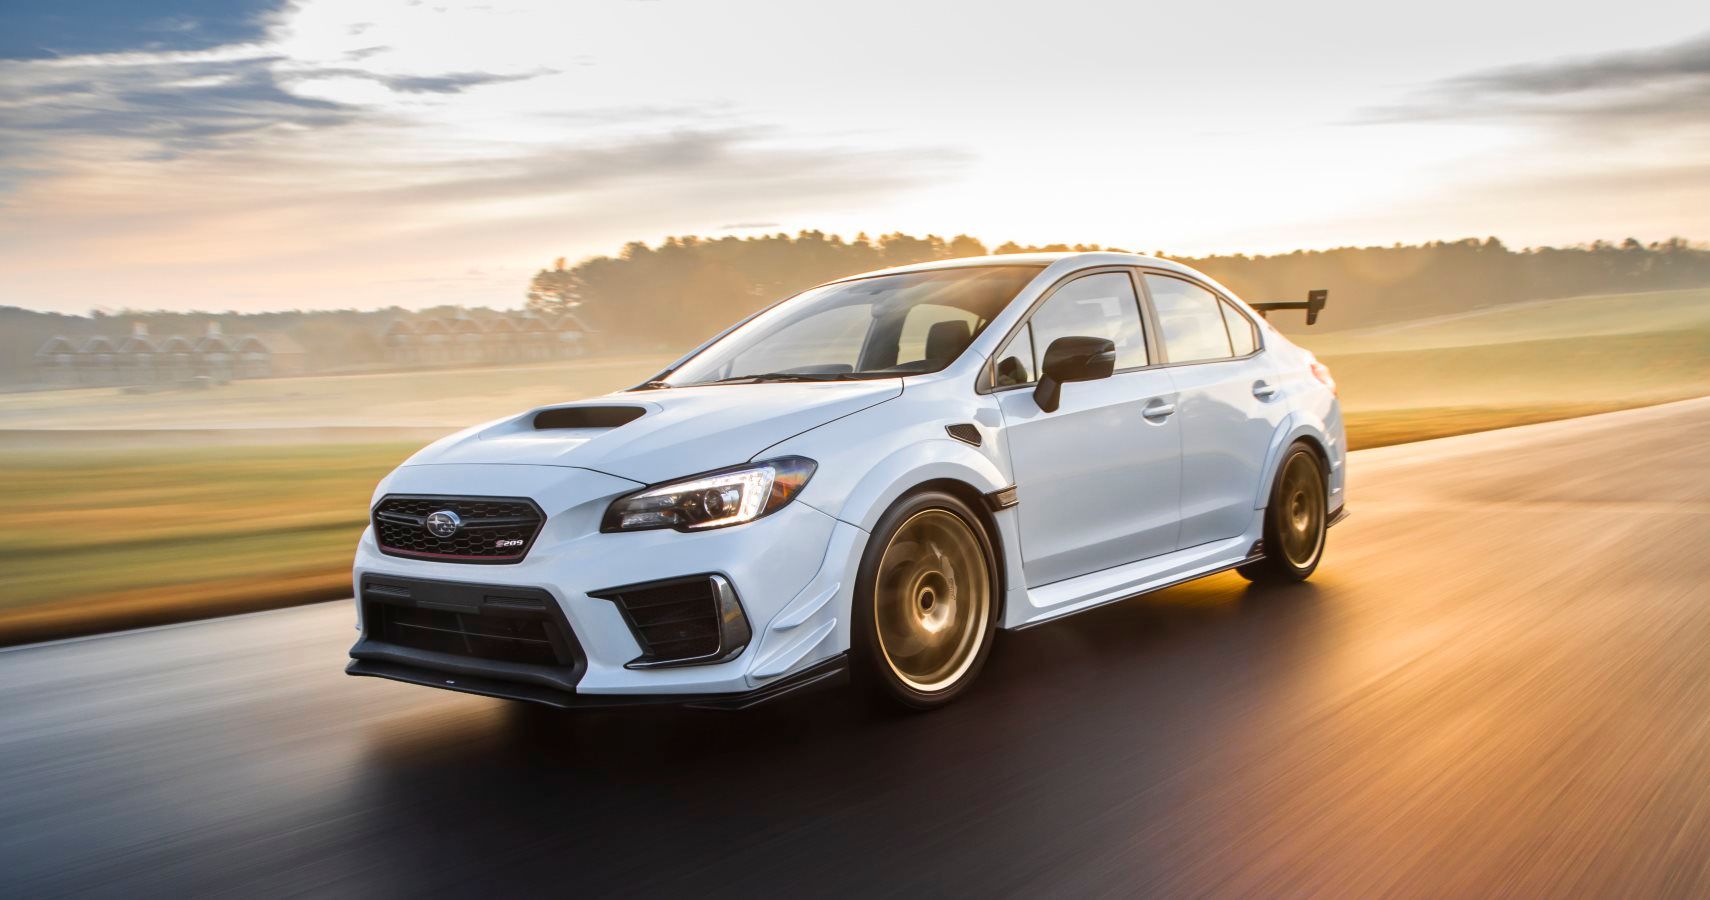 Check Out Subaru's WRX STI S209 With Wider Body & More Horsepower